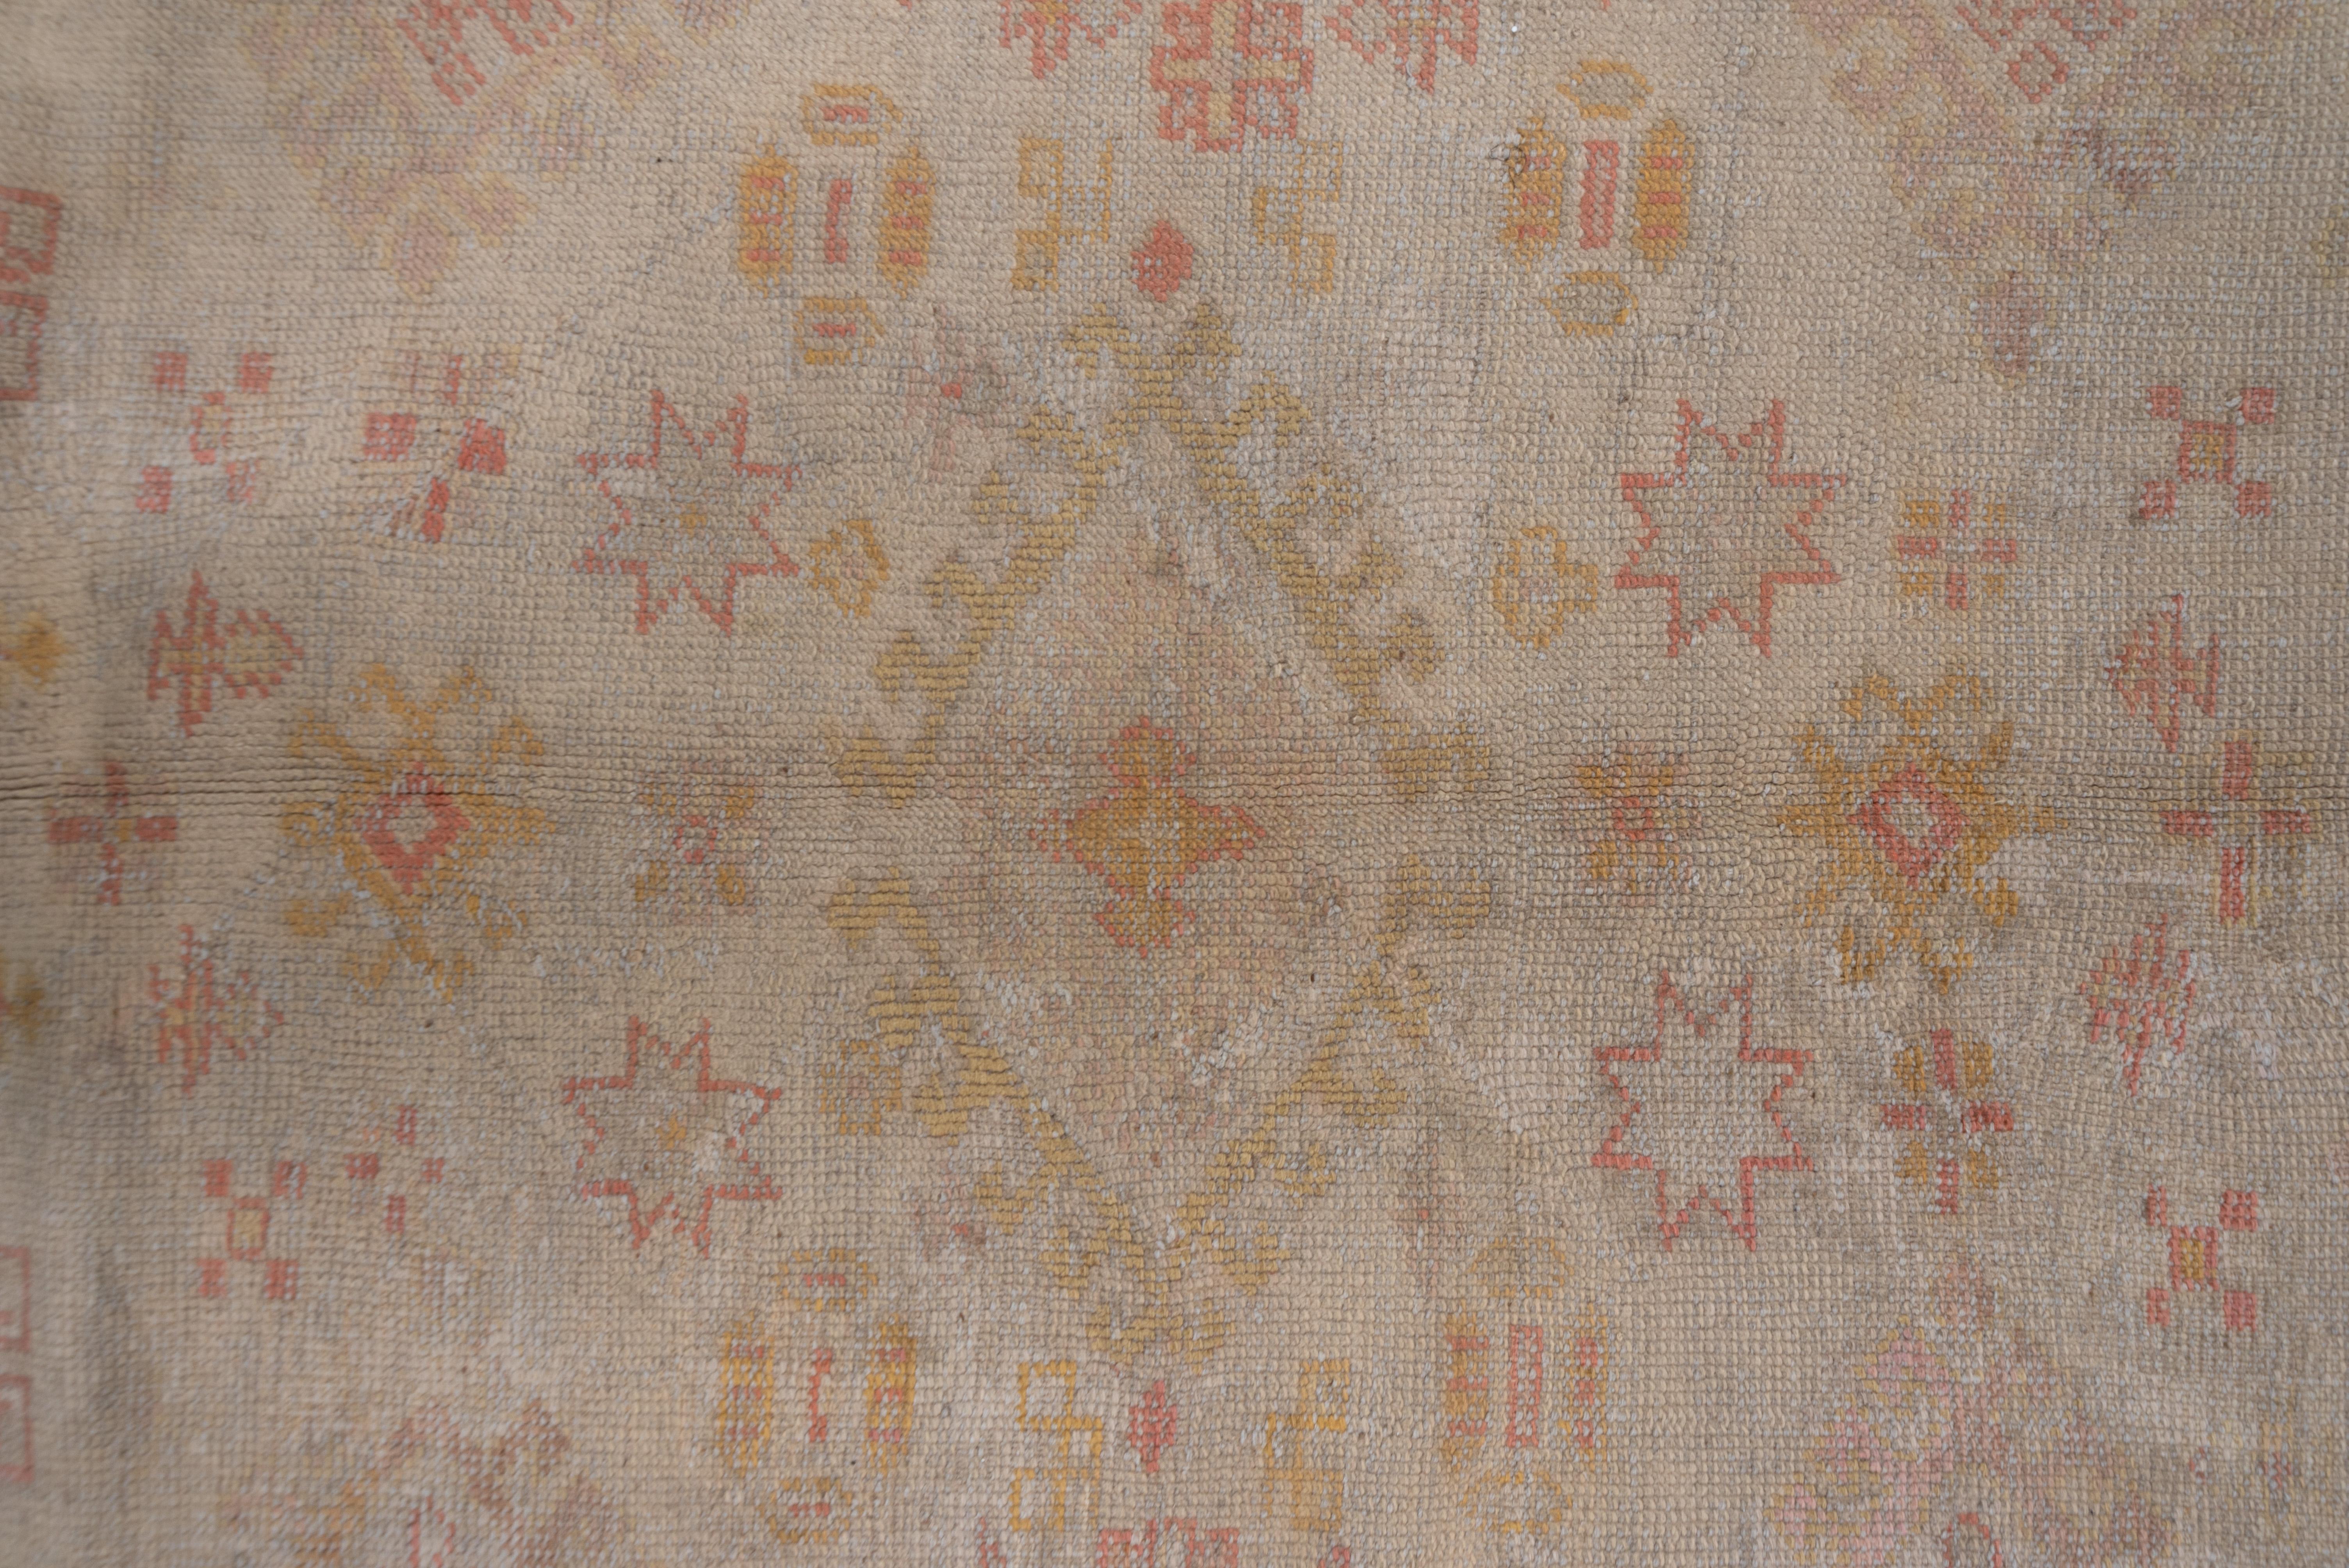 Authentic Antique Turkish Oushak Rug, Neutral Field, Pink & Yellow Accents In Good Condition For Sale In New York, NY